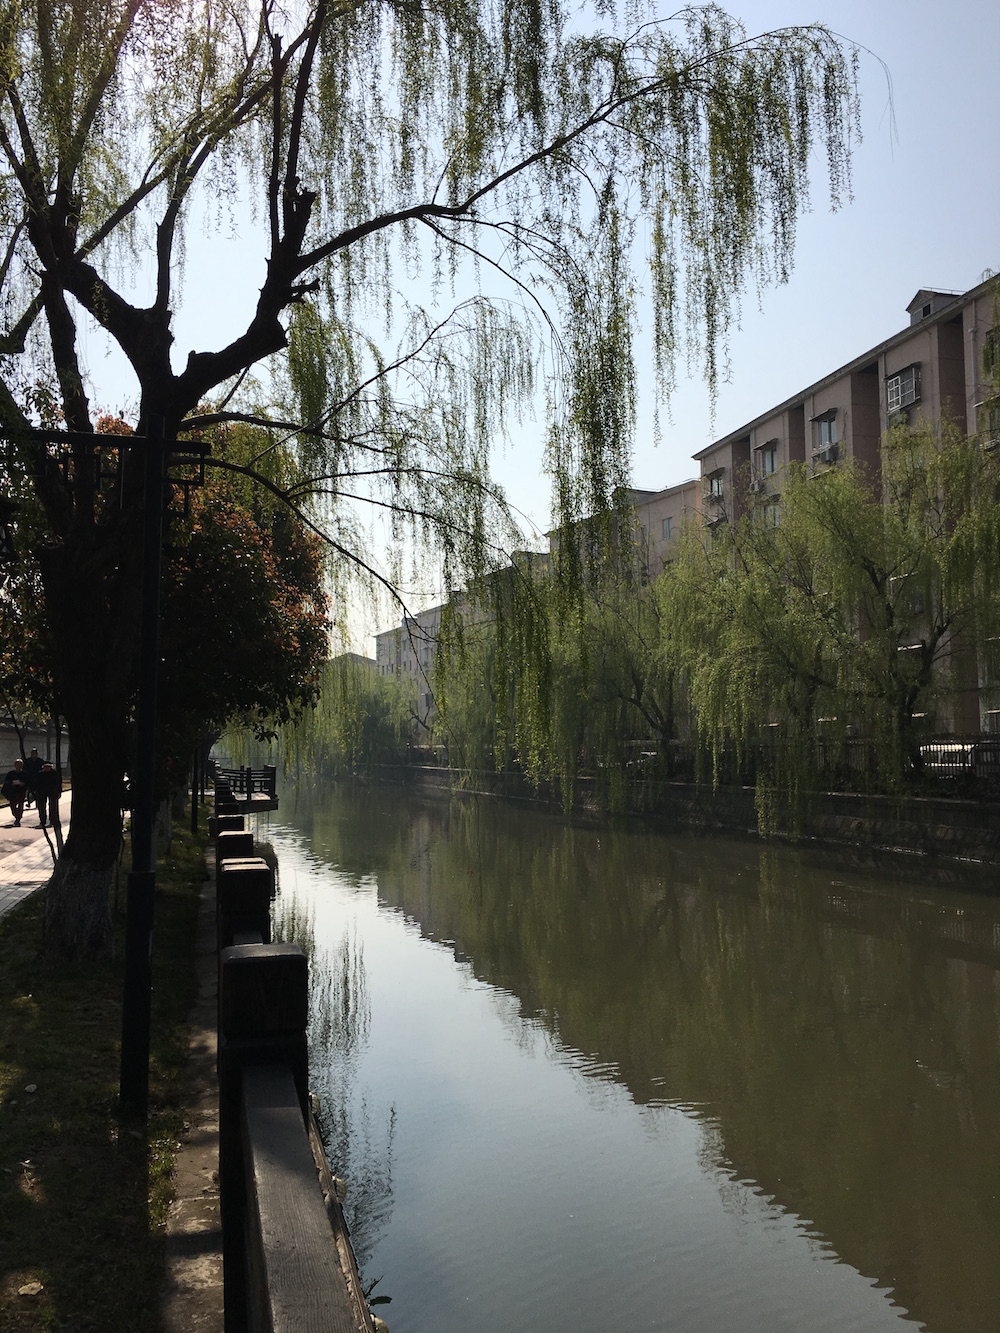 While running errands, we walked past a park. There was a river with fisherman fishing along the sides, birds chirping in their cages along the walls, and old people exercising on rusty Asian park gyms. 